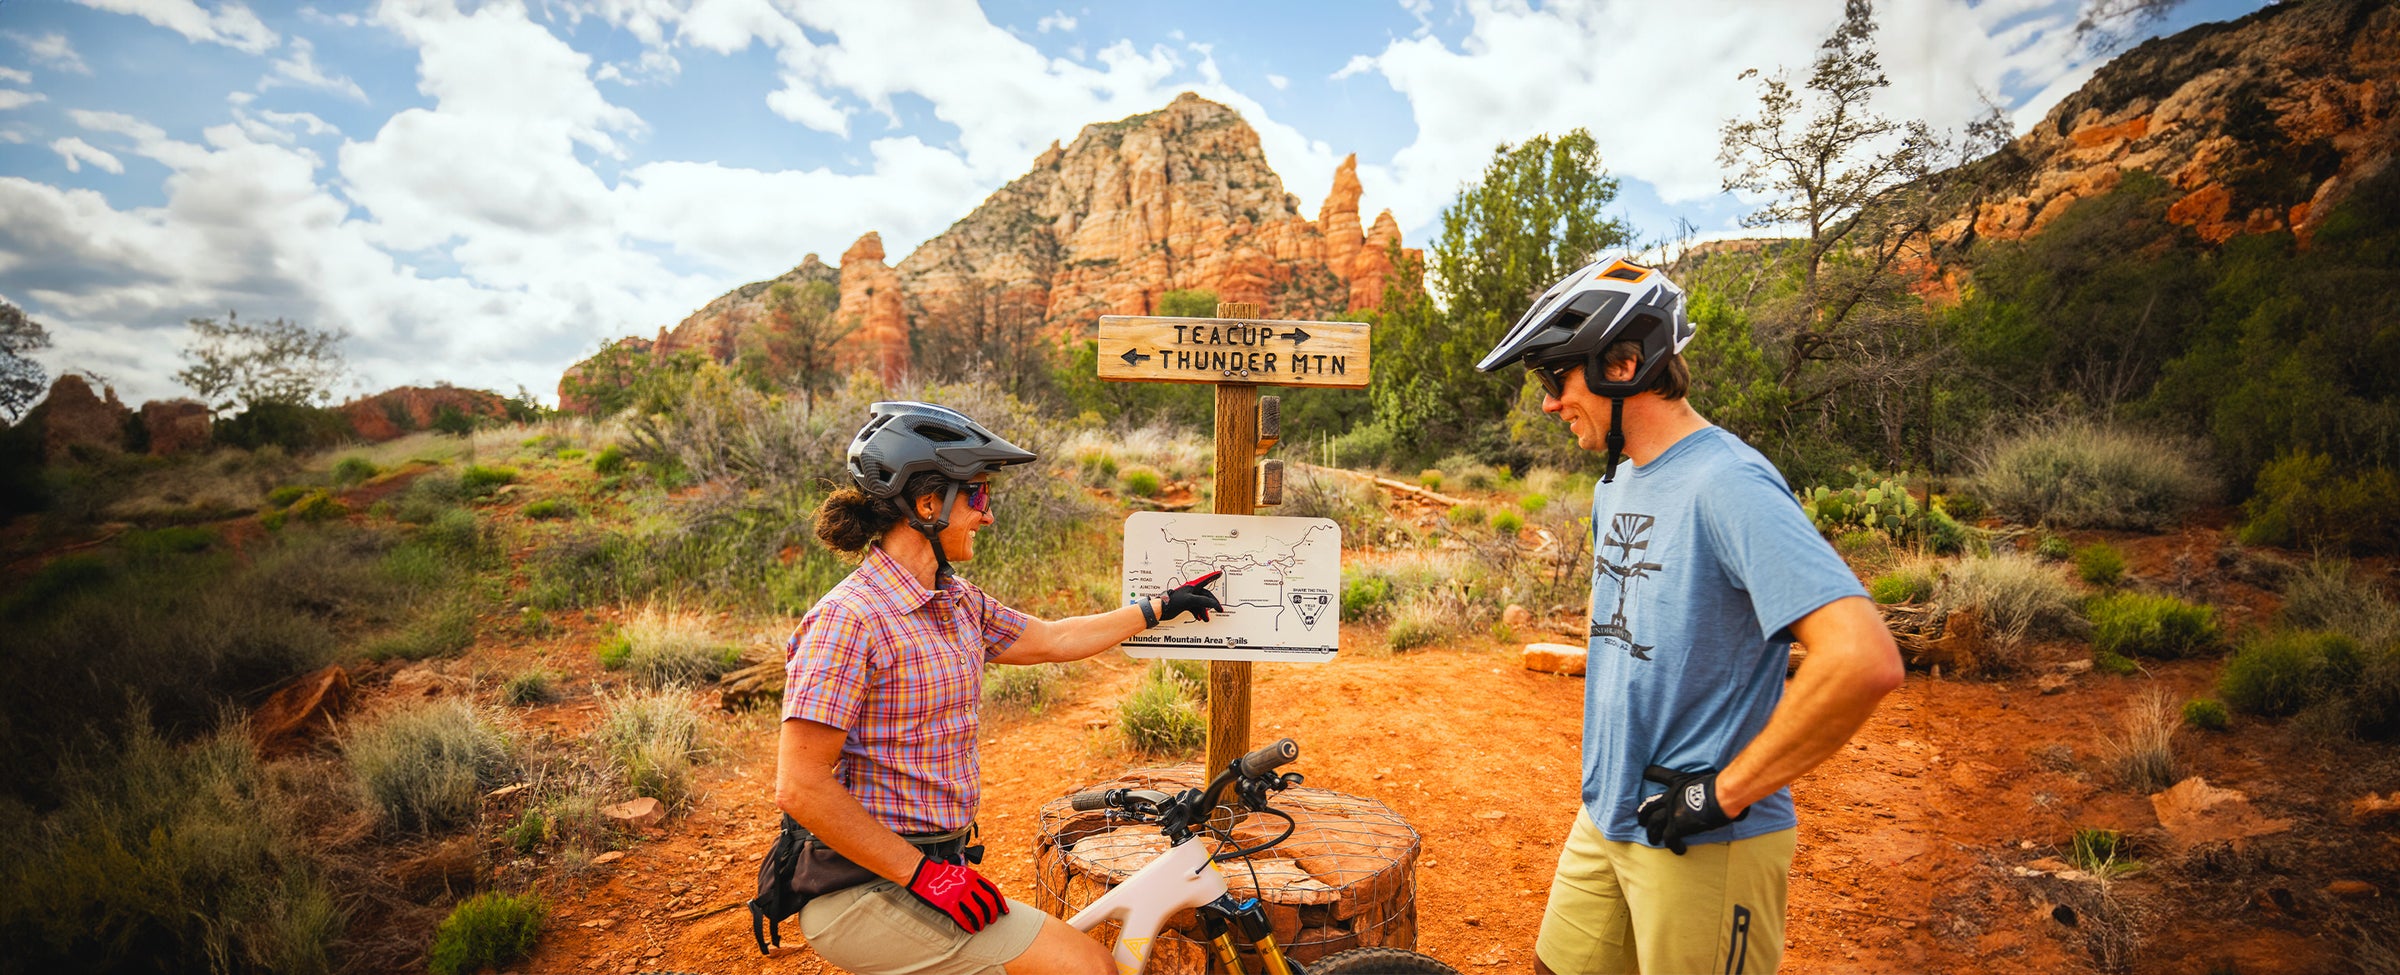 riders stopped at trail sign to plan bike route in Sedona Arizona